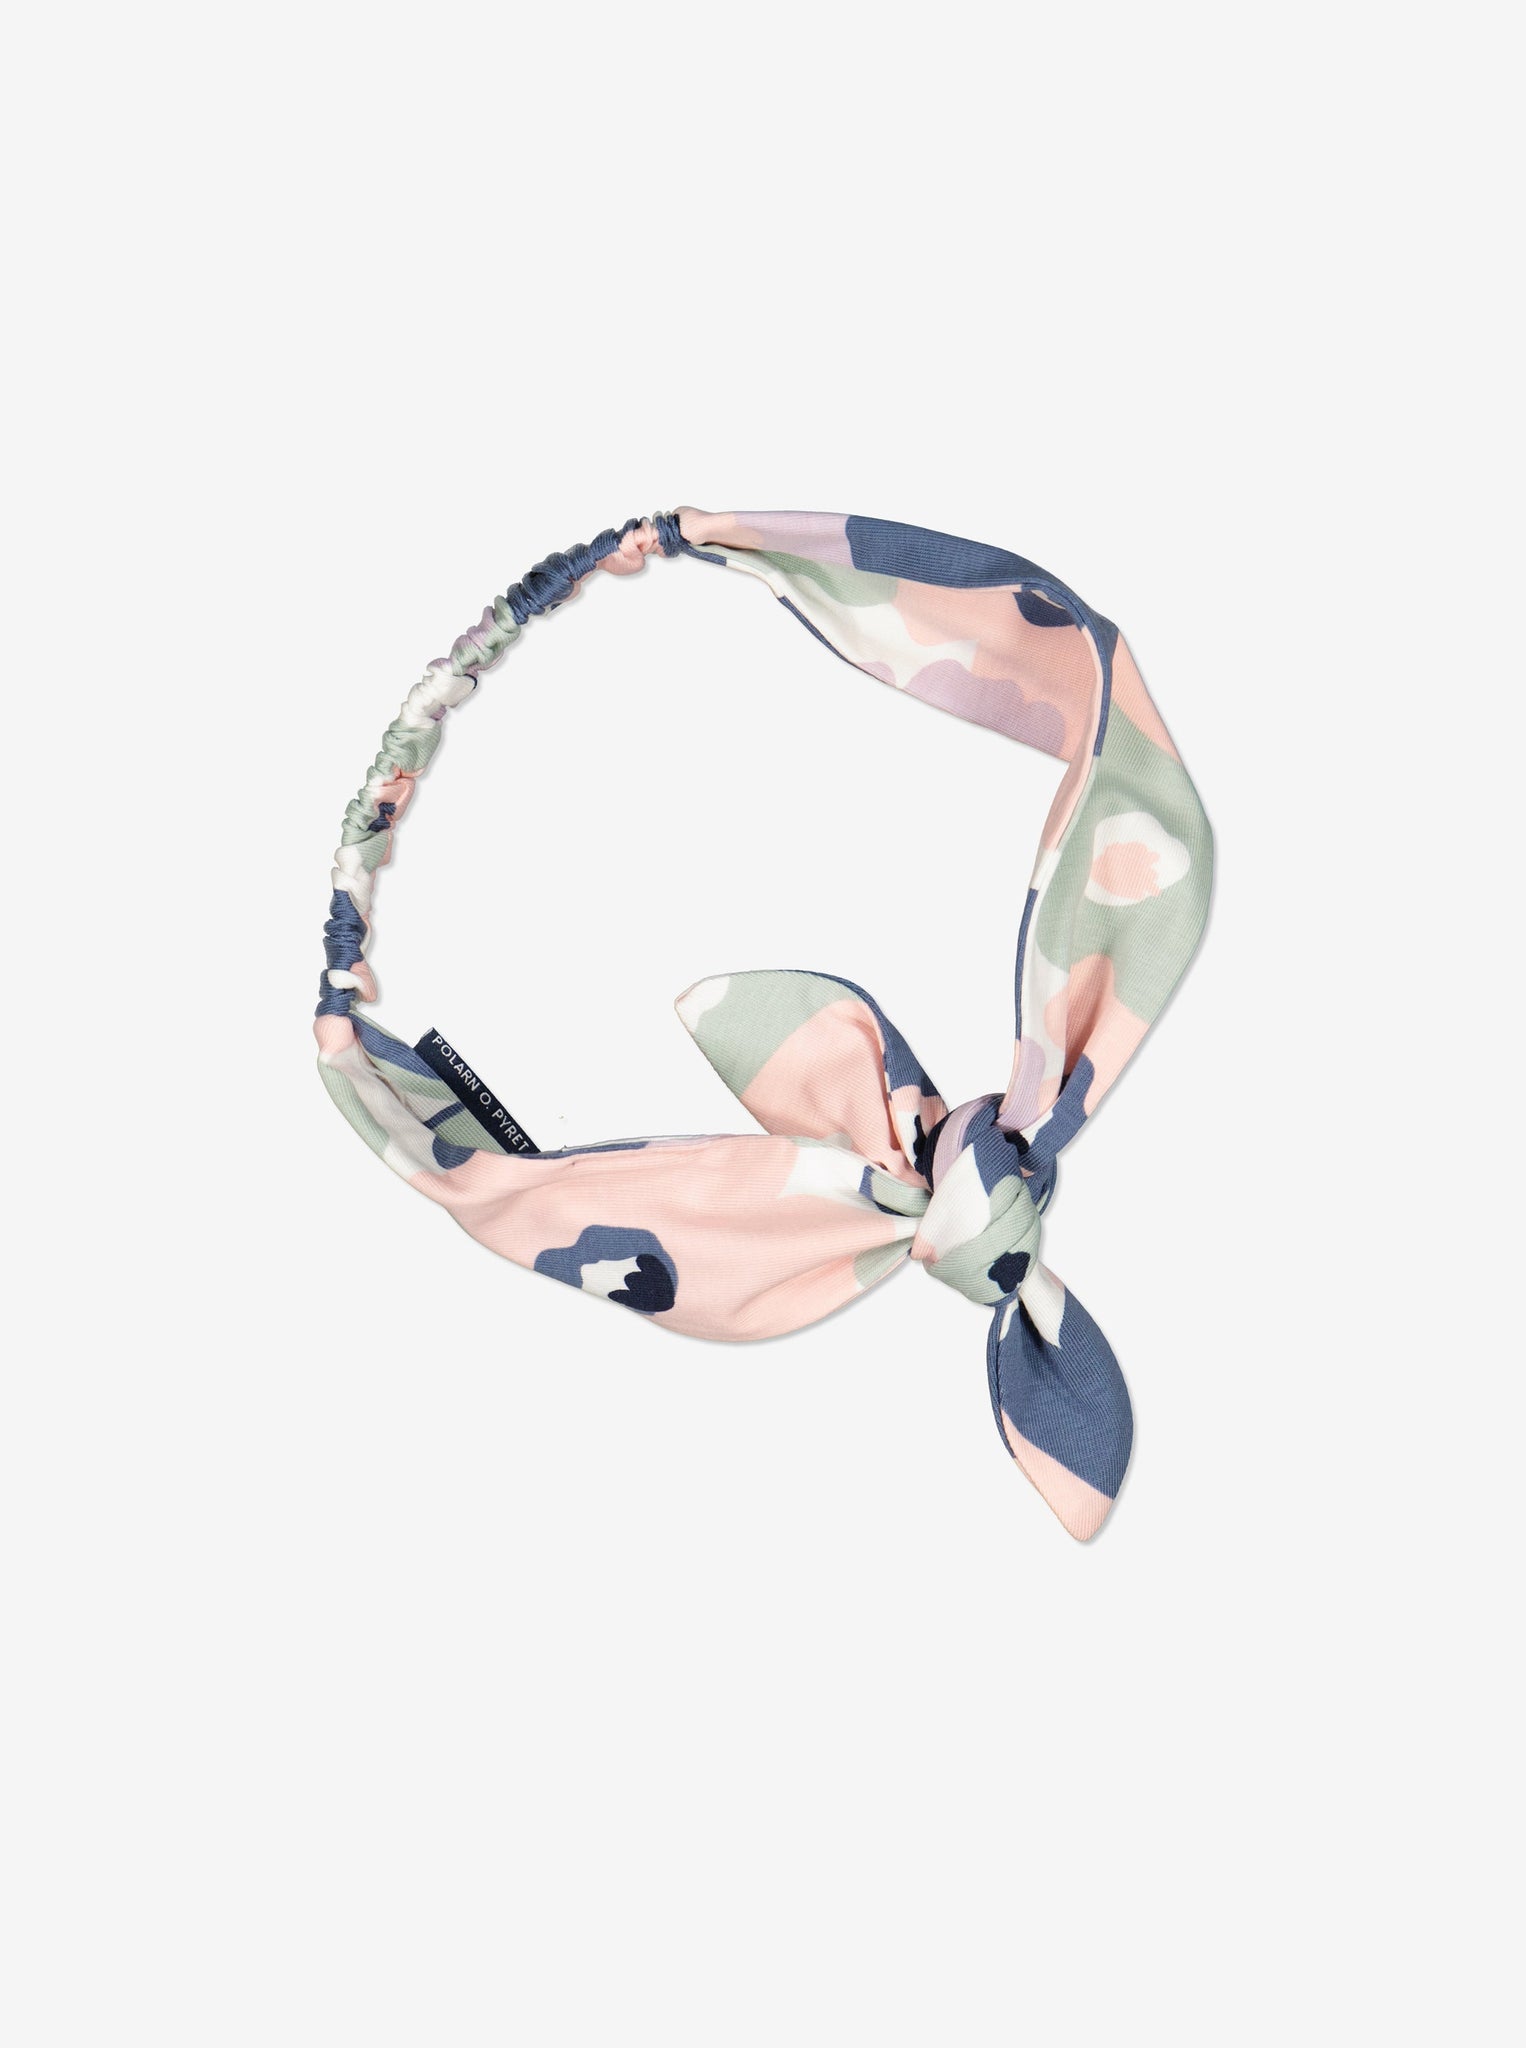  Floral Print Kids Headband from Polarn O. Pyret Kidswear. Made using eco-friendly materials.